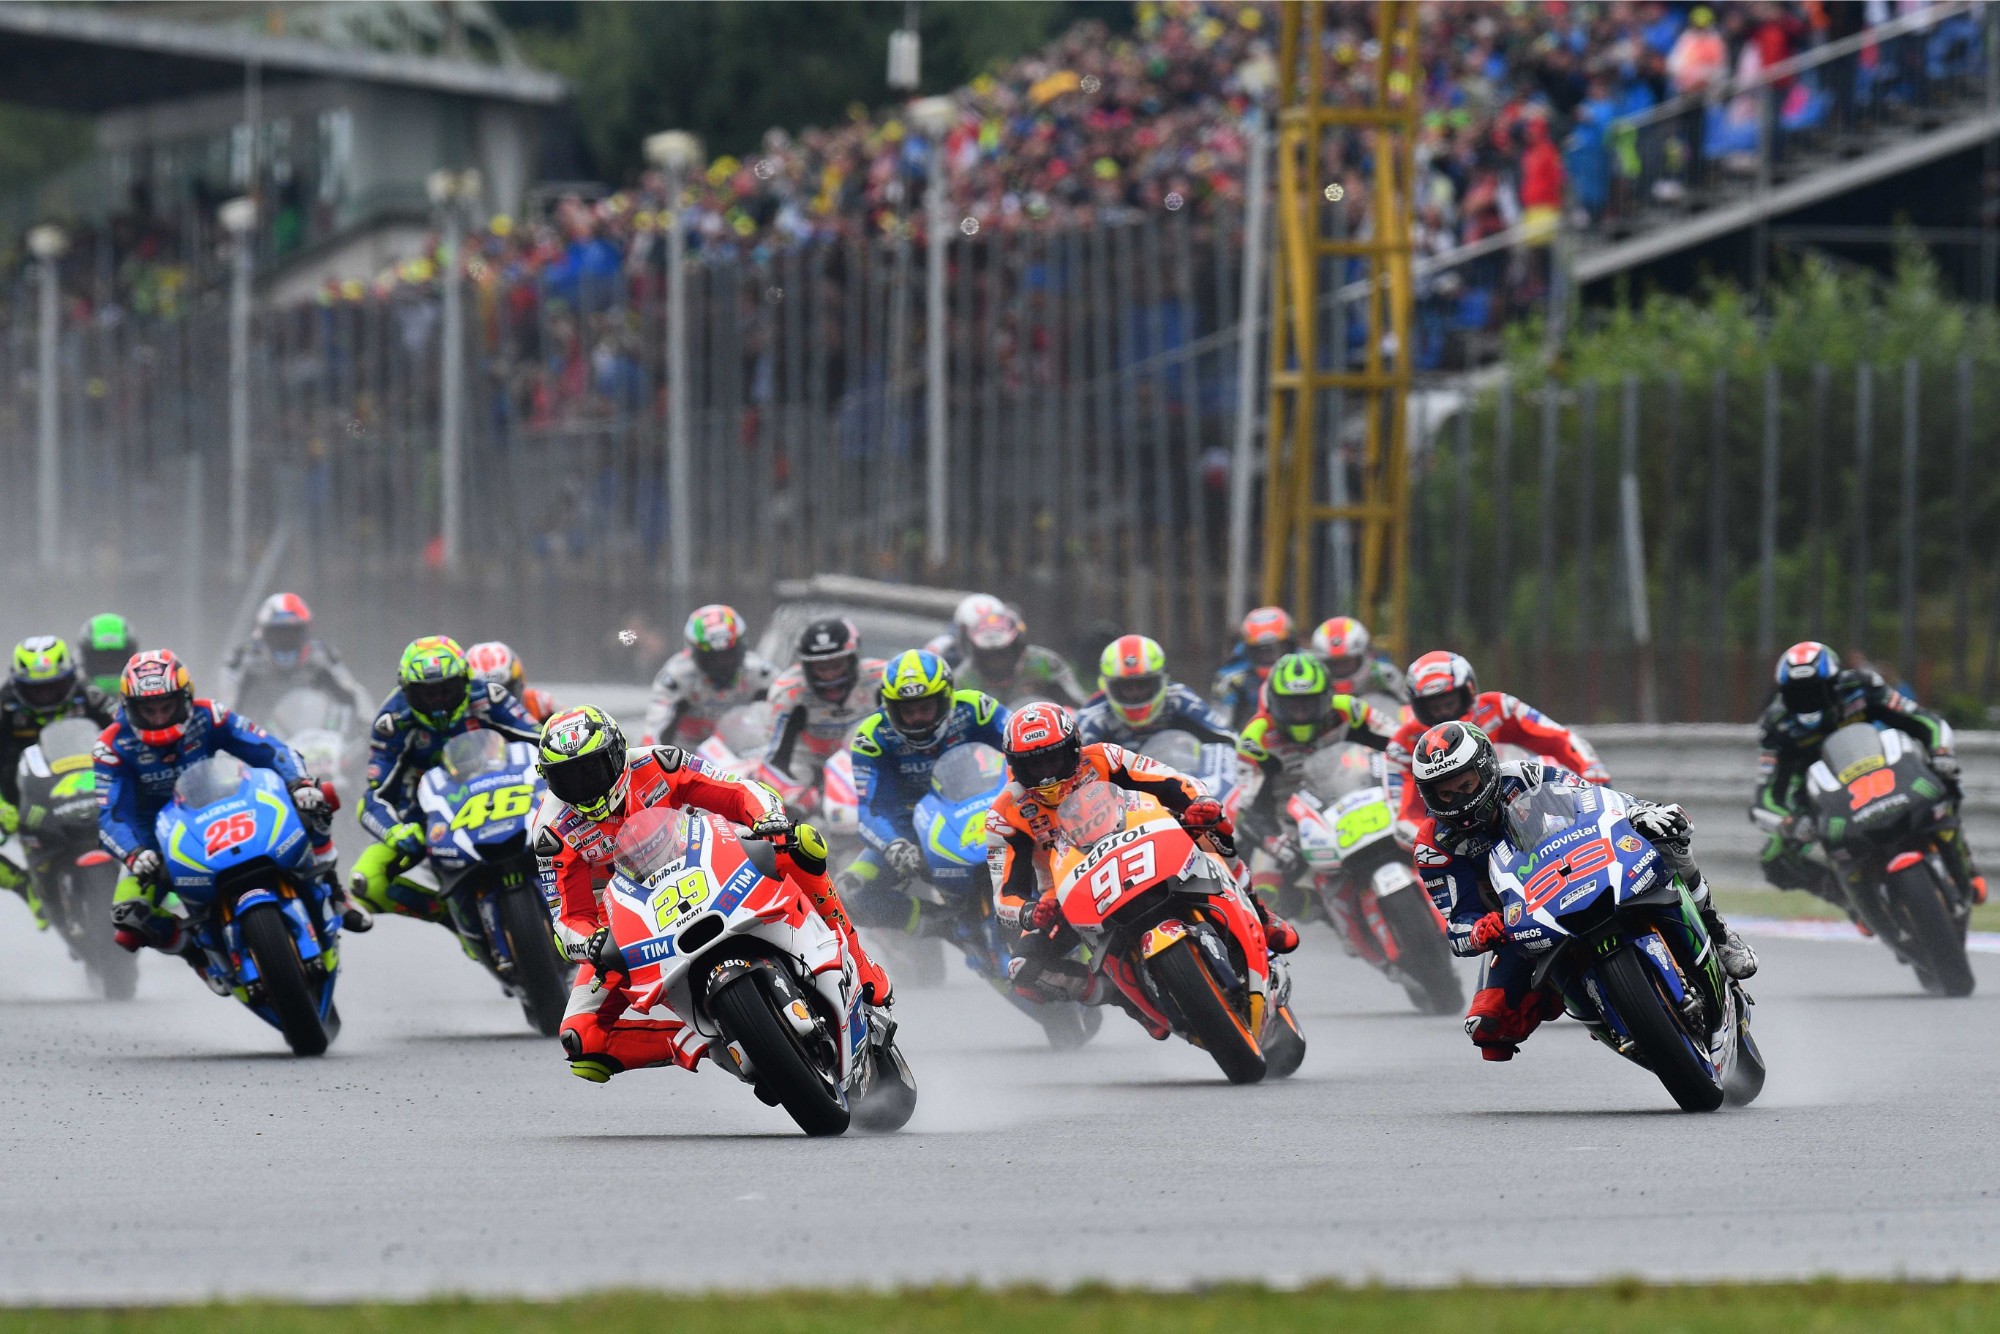 MotoGP World Championship To Resume This Coming Weekend At Brno